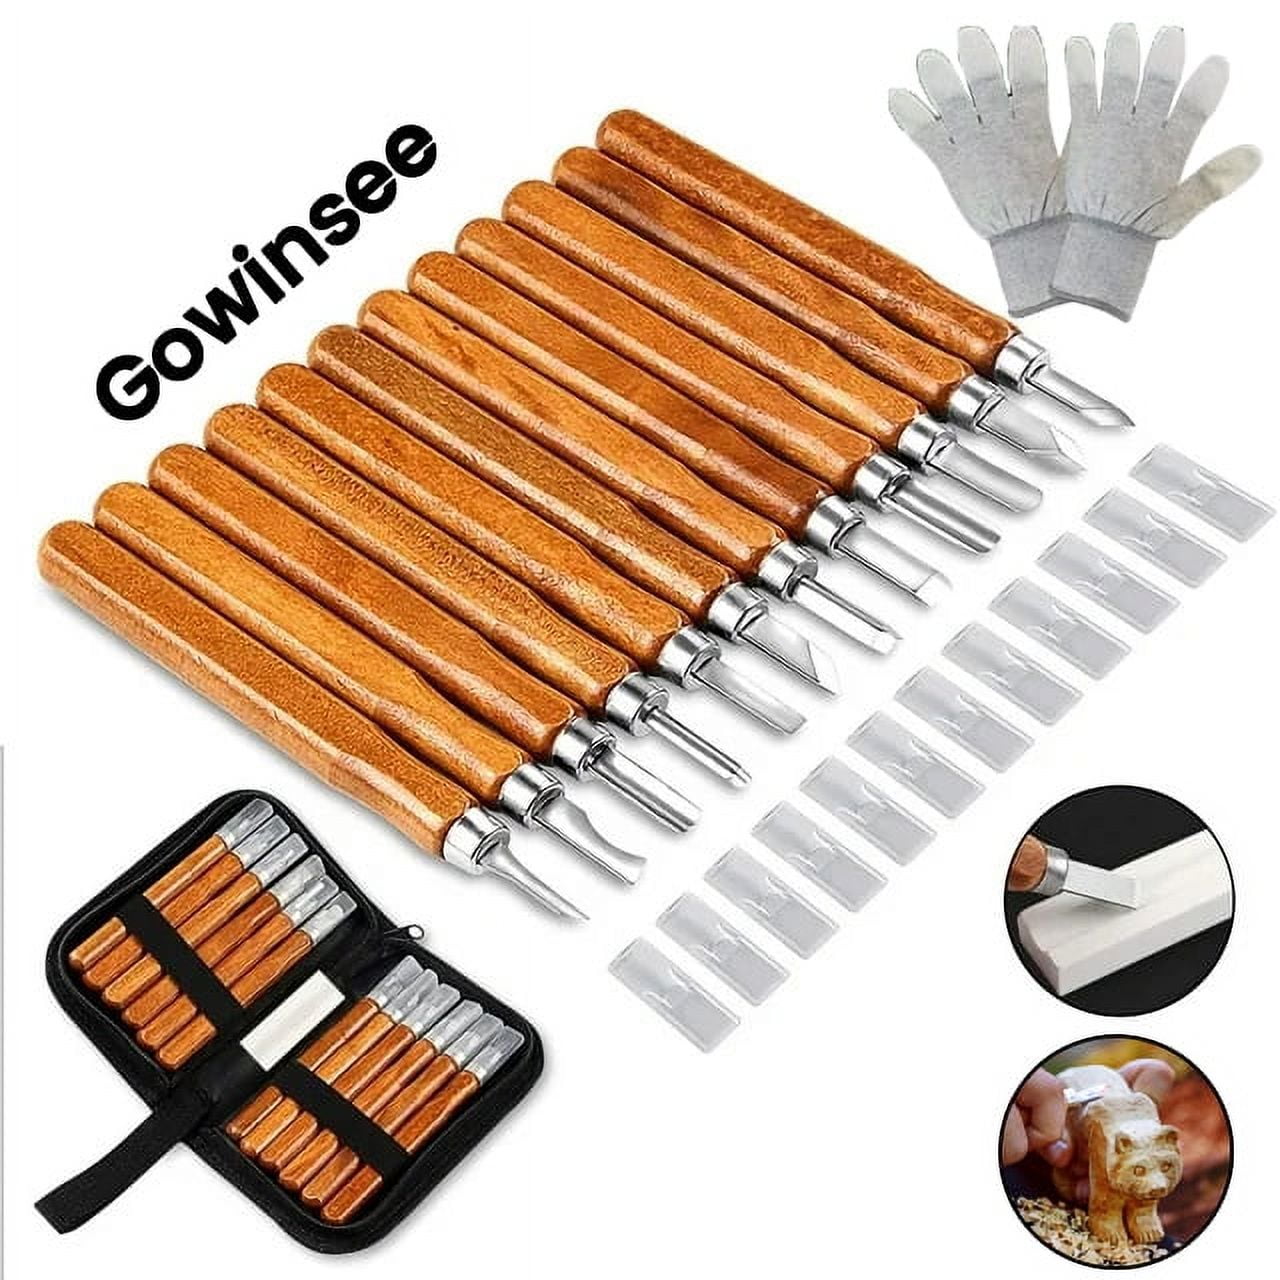 Deadwood Crafted Tools Wood Carving Tools Kit - 12pc Wood Carving Chisel  Set 